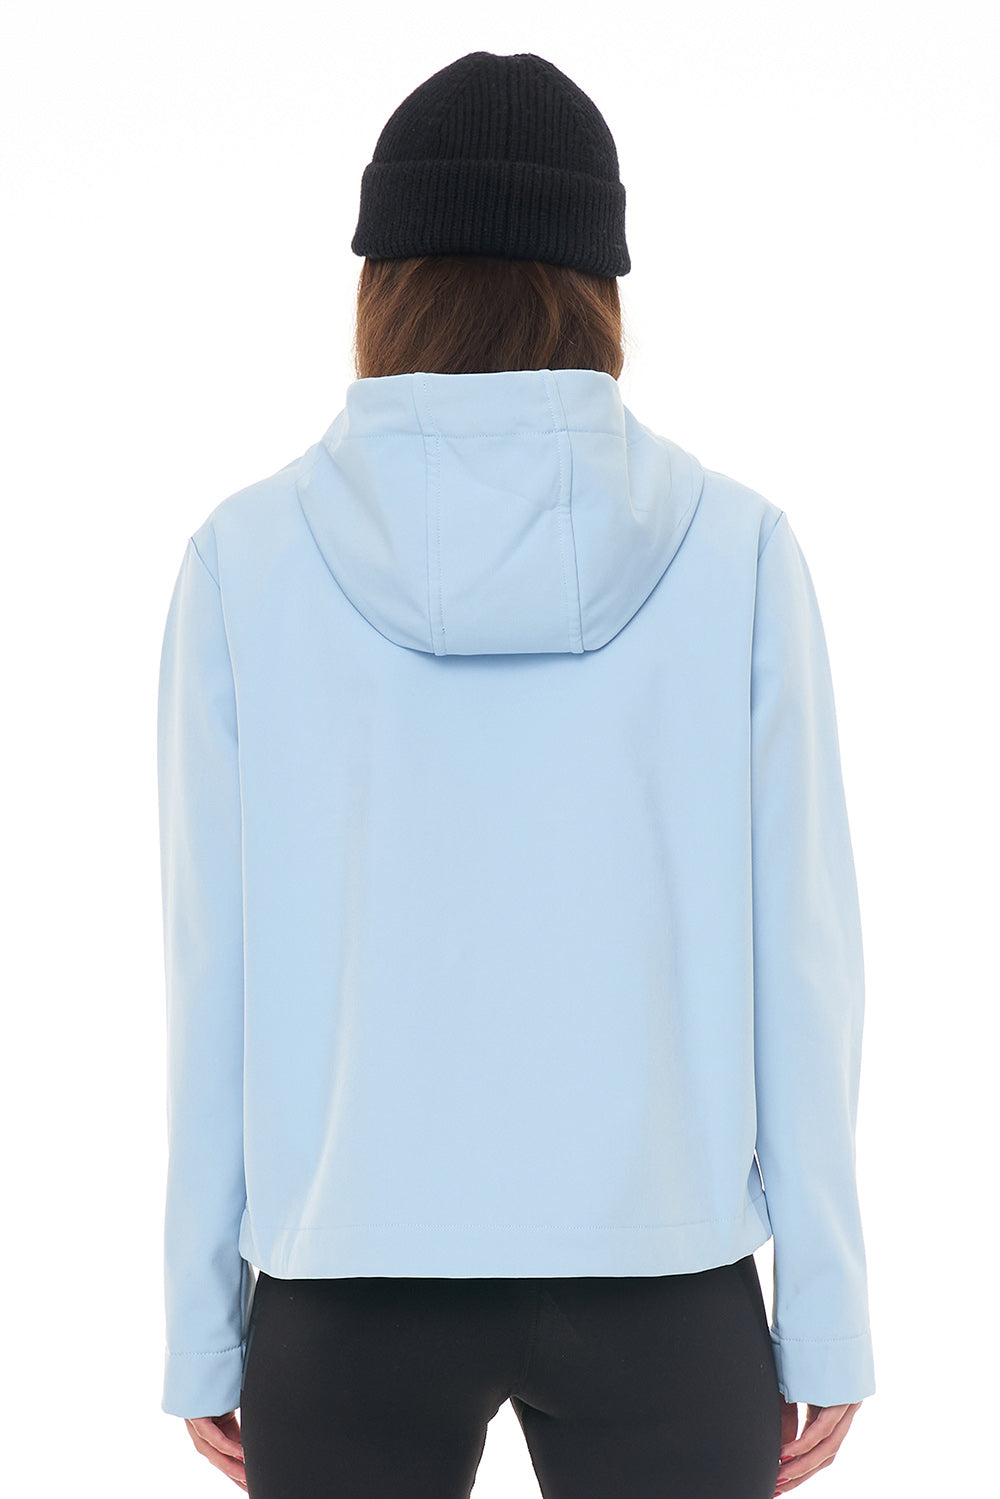 HUFFER WOMENS SOFTSHELL JACKET - GLACIER - THE VOGUE STORE